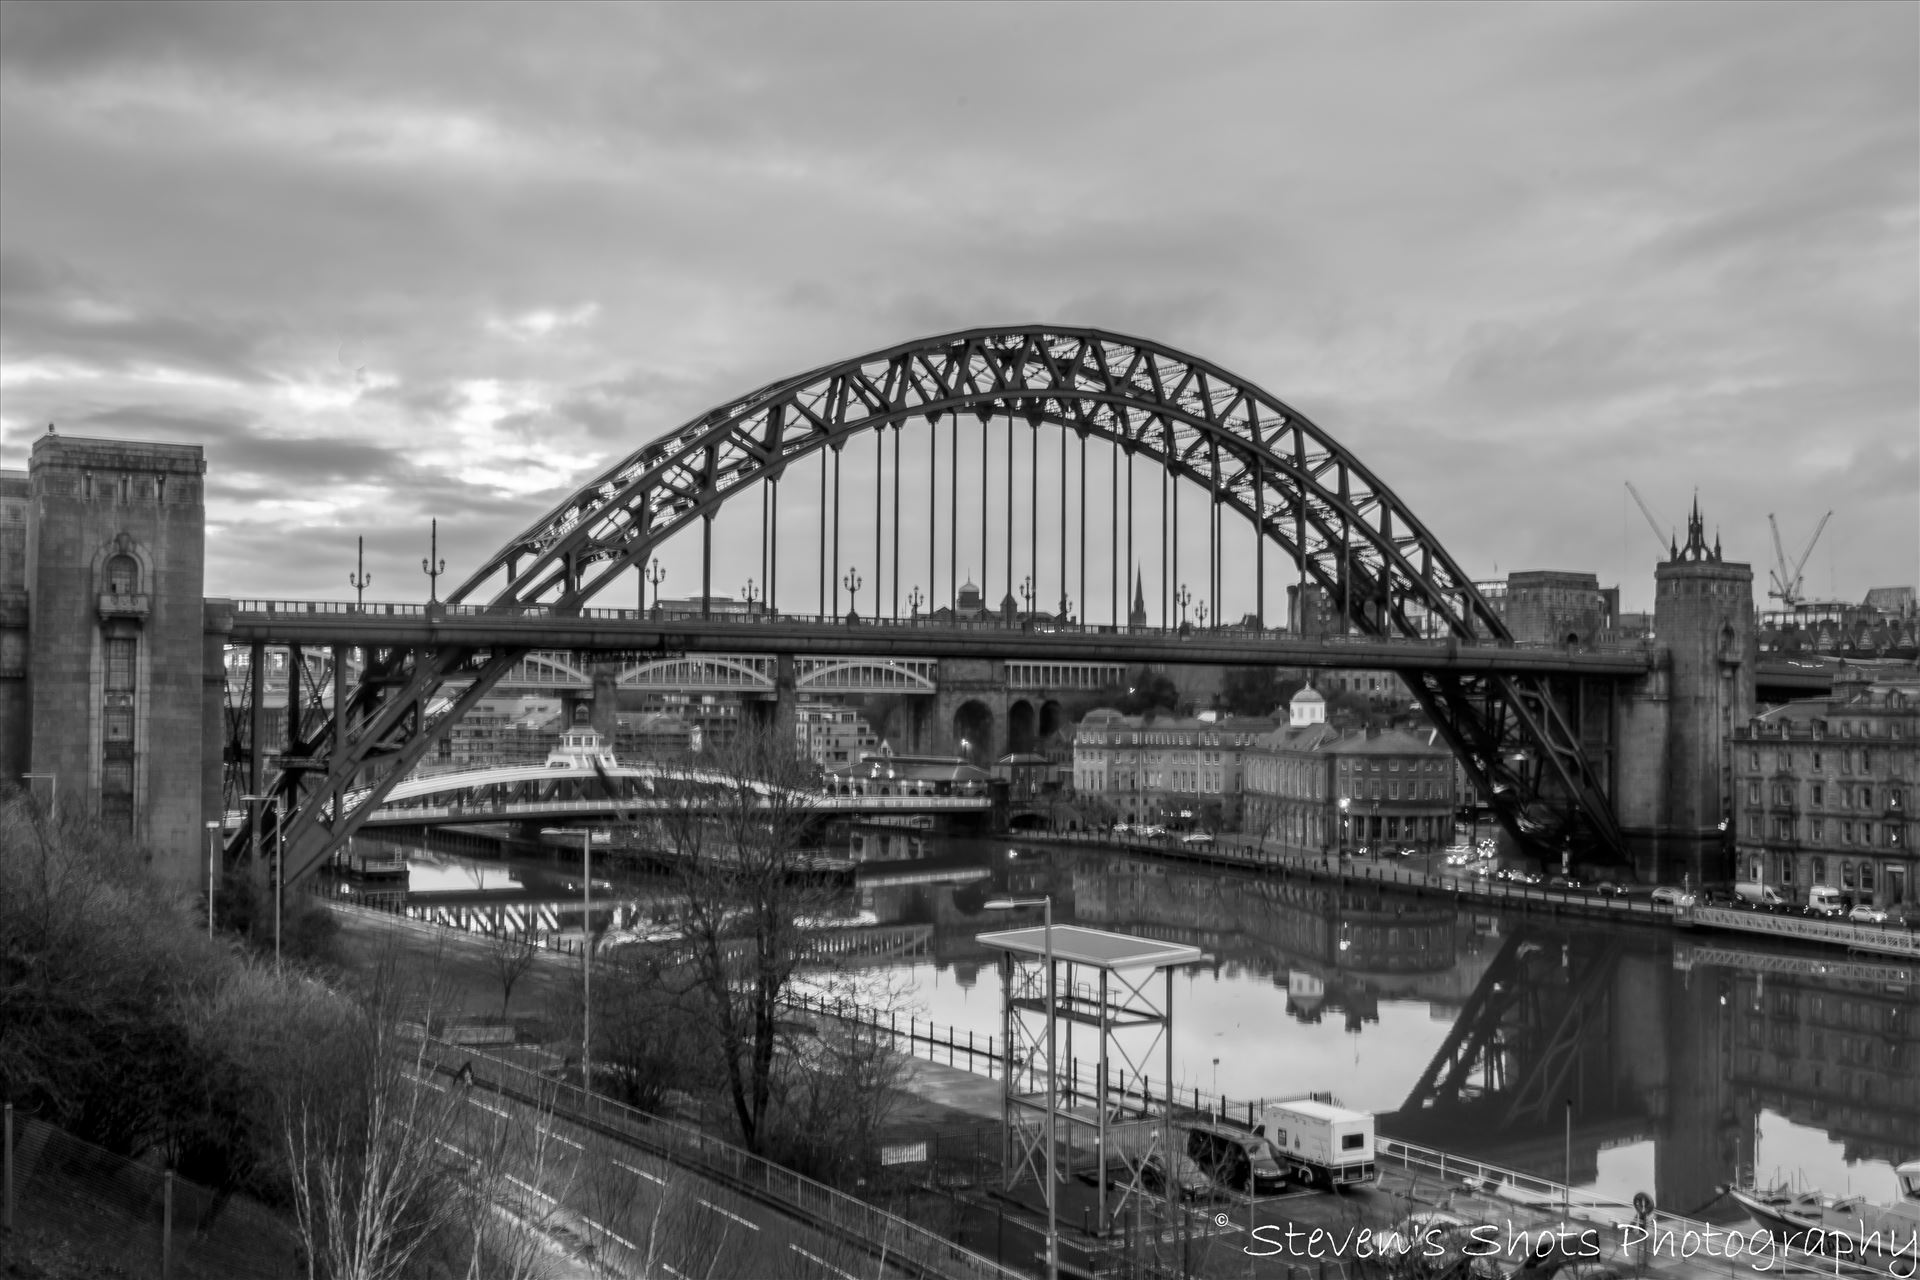 Tyne Bridge in black and white - A shot of the Tyne Bridge in black and white from outside the Sage looking towards the Swing Bridge and High level bridge. by Steven's Shots Photography